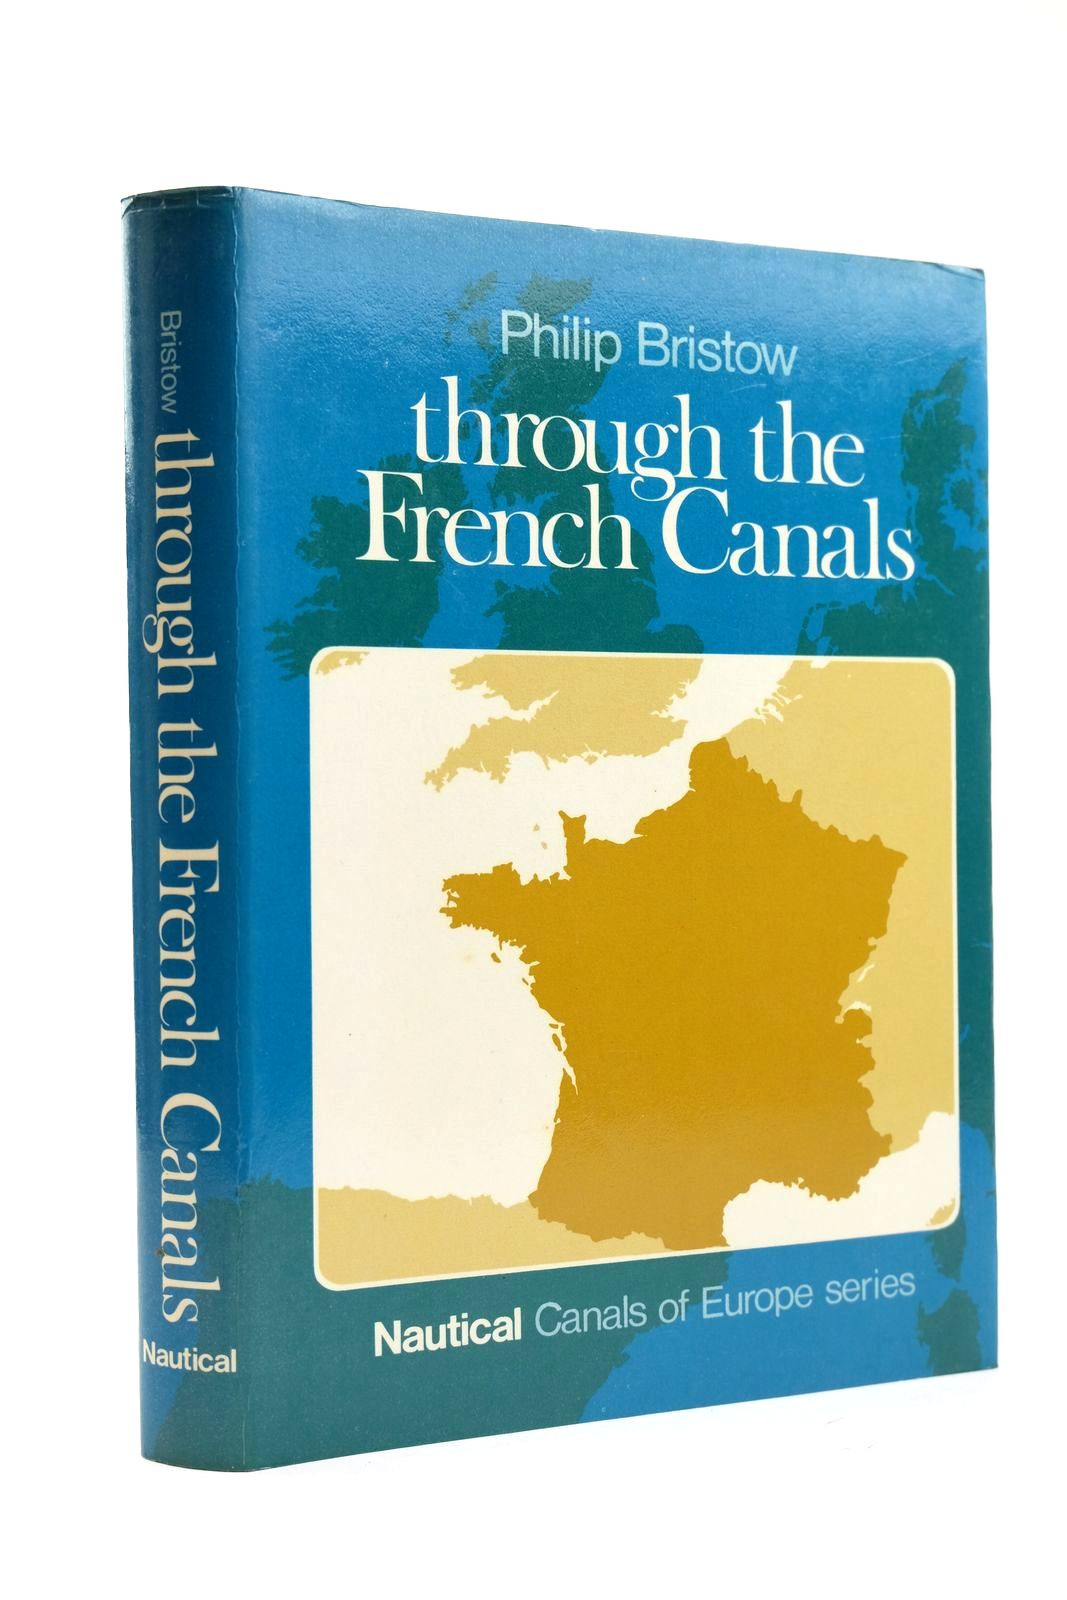 Photo of THROUGH THE FRENCH CANALS written by Bristow, Philip published by Nautical Publishing Company (STOCK CODE: 2131913)  for sale by Stella & Rose's Books